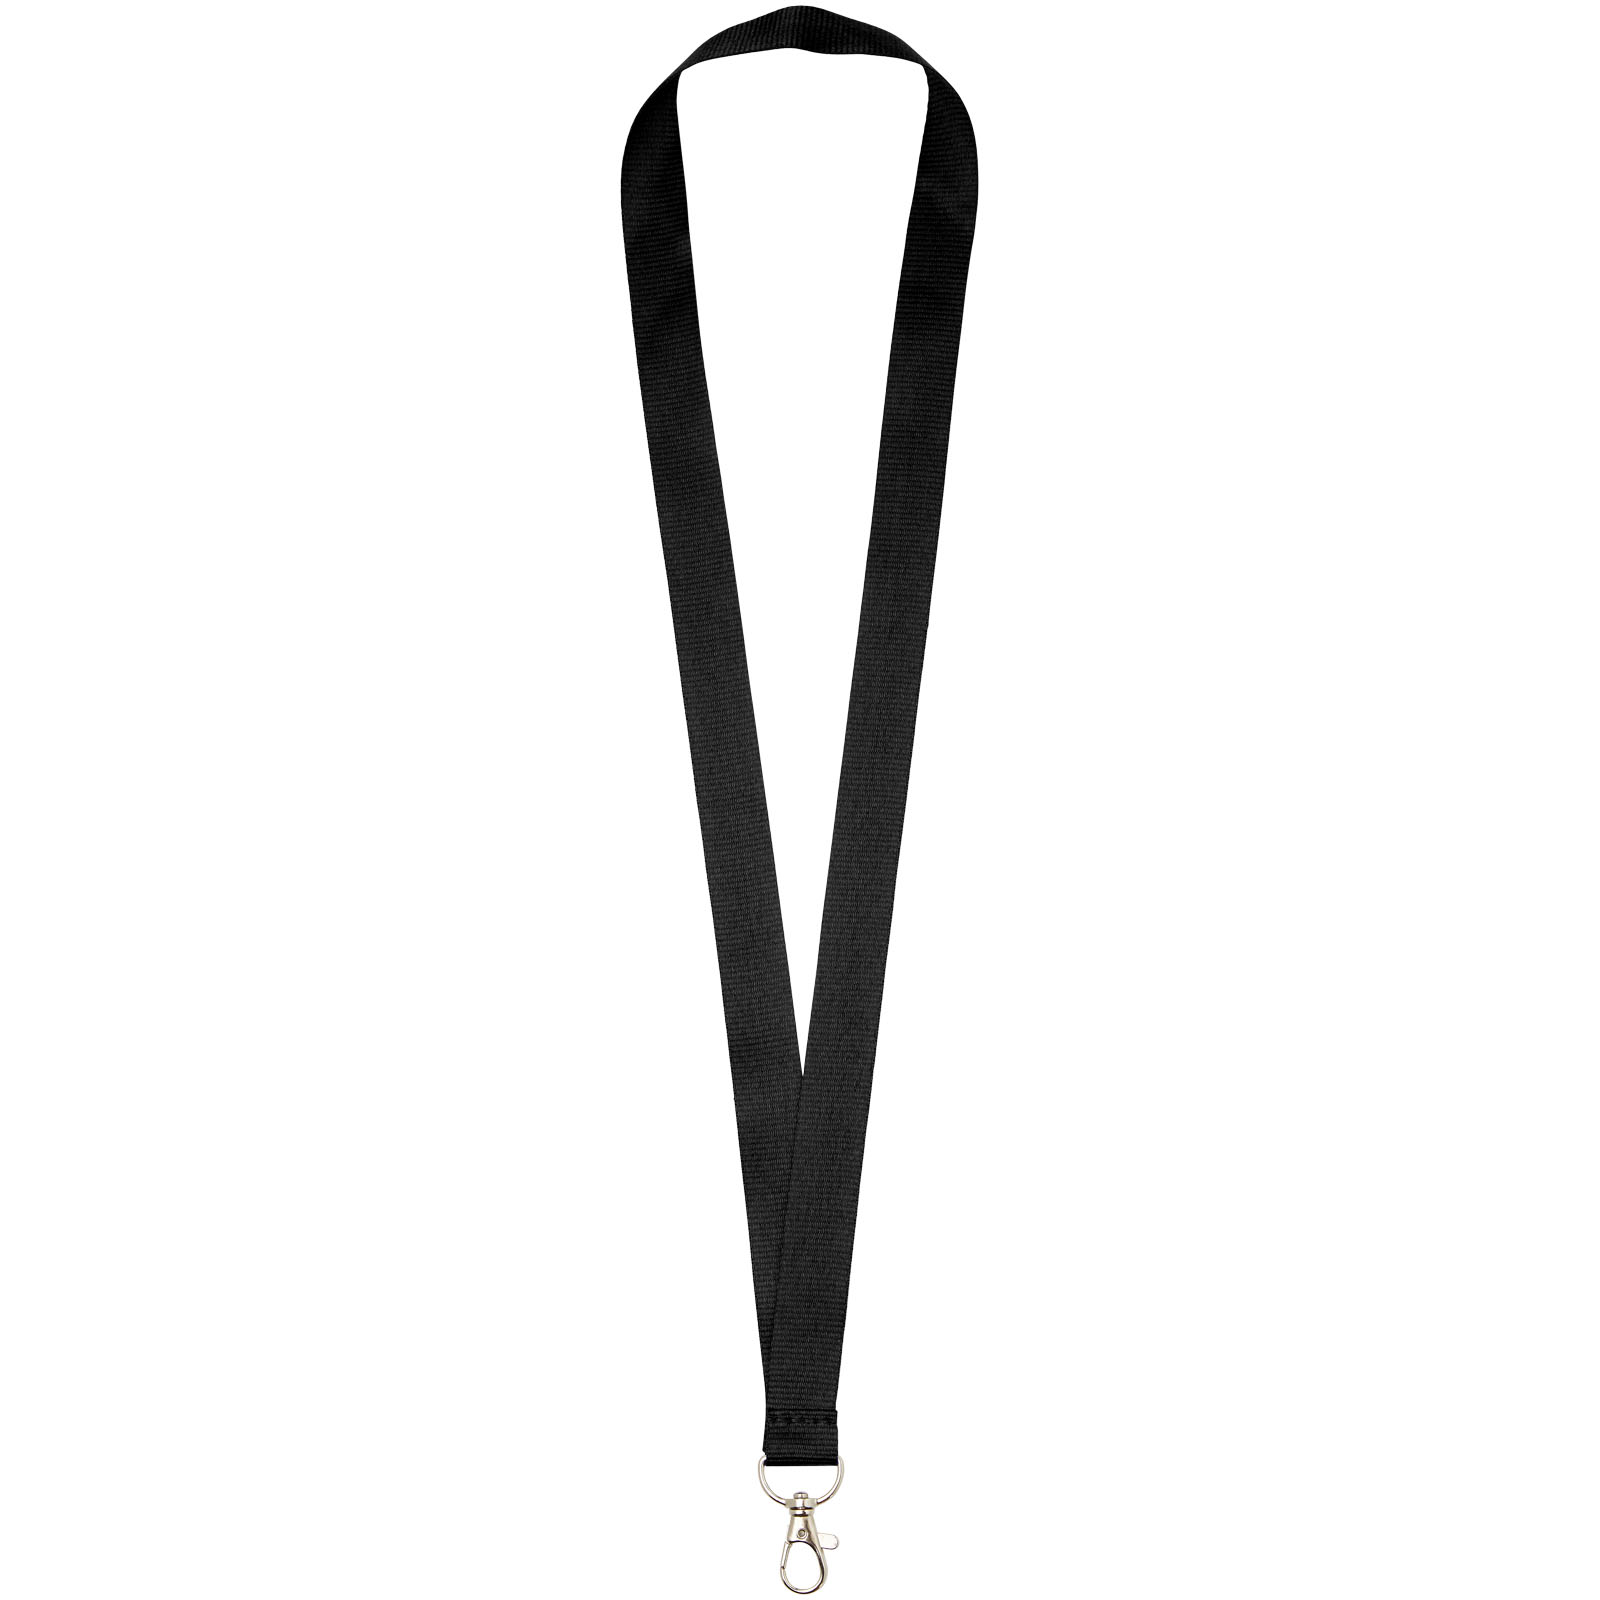 Giveaways - Impey lanyard with convenient hook